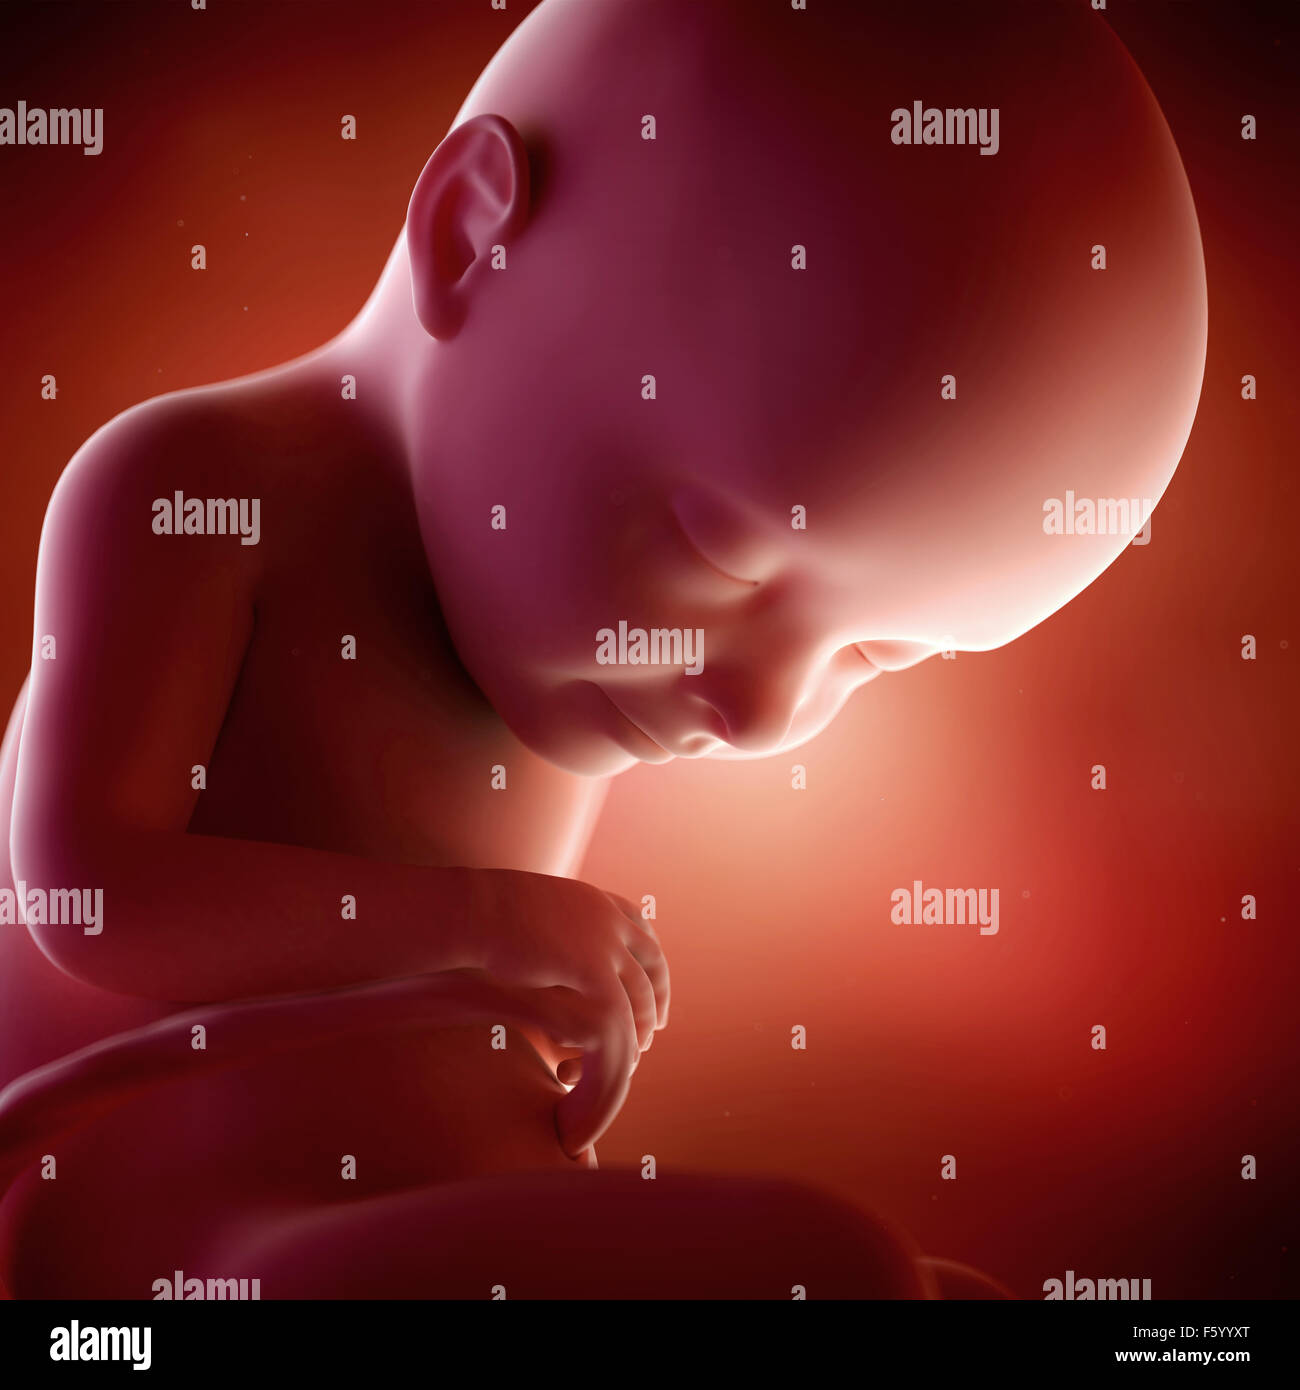 medical accurate 3d illustration of a fetus week 32 Stock Photo